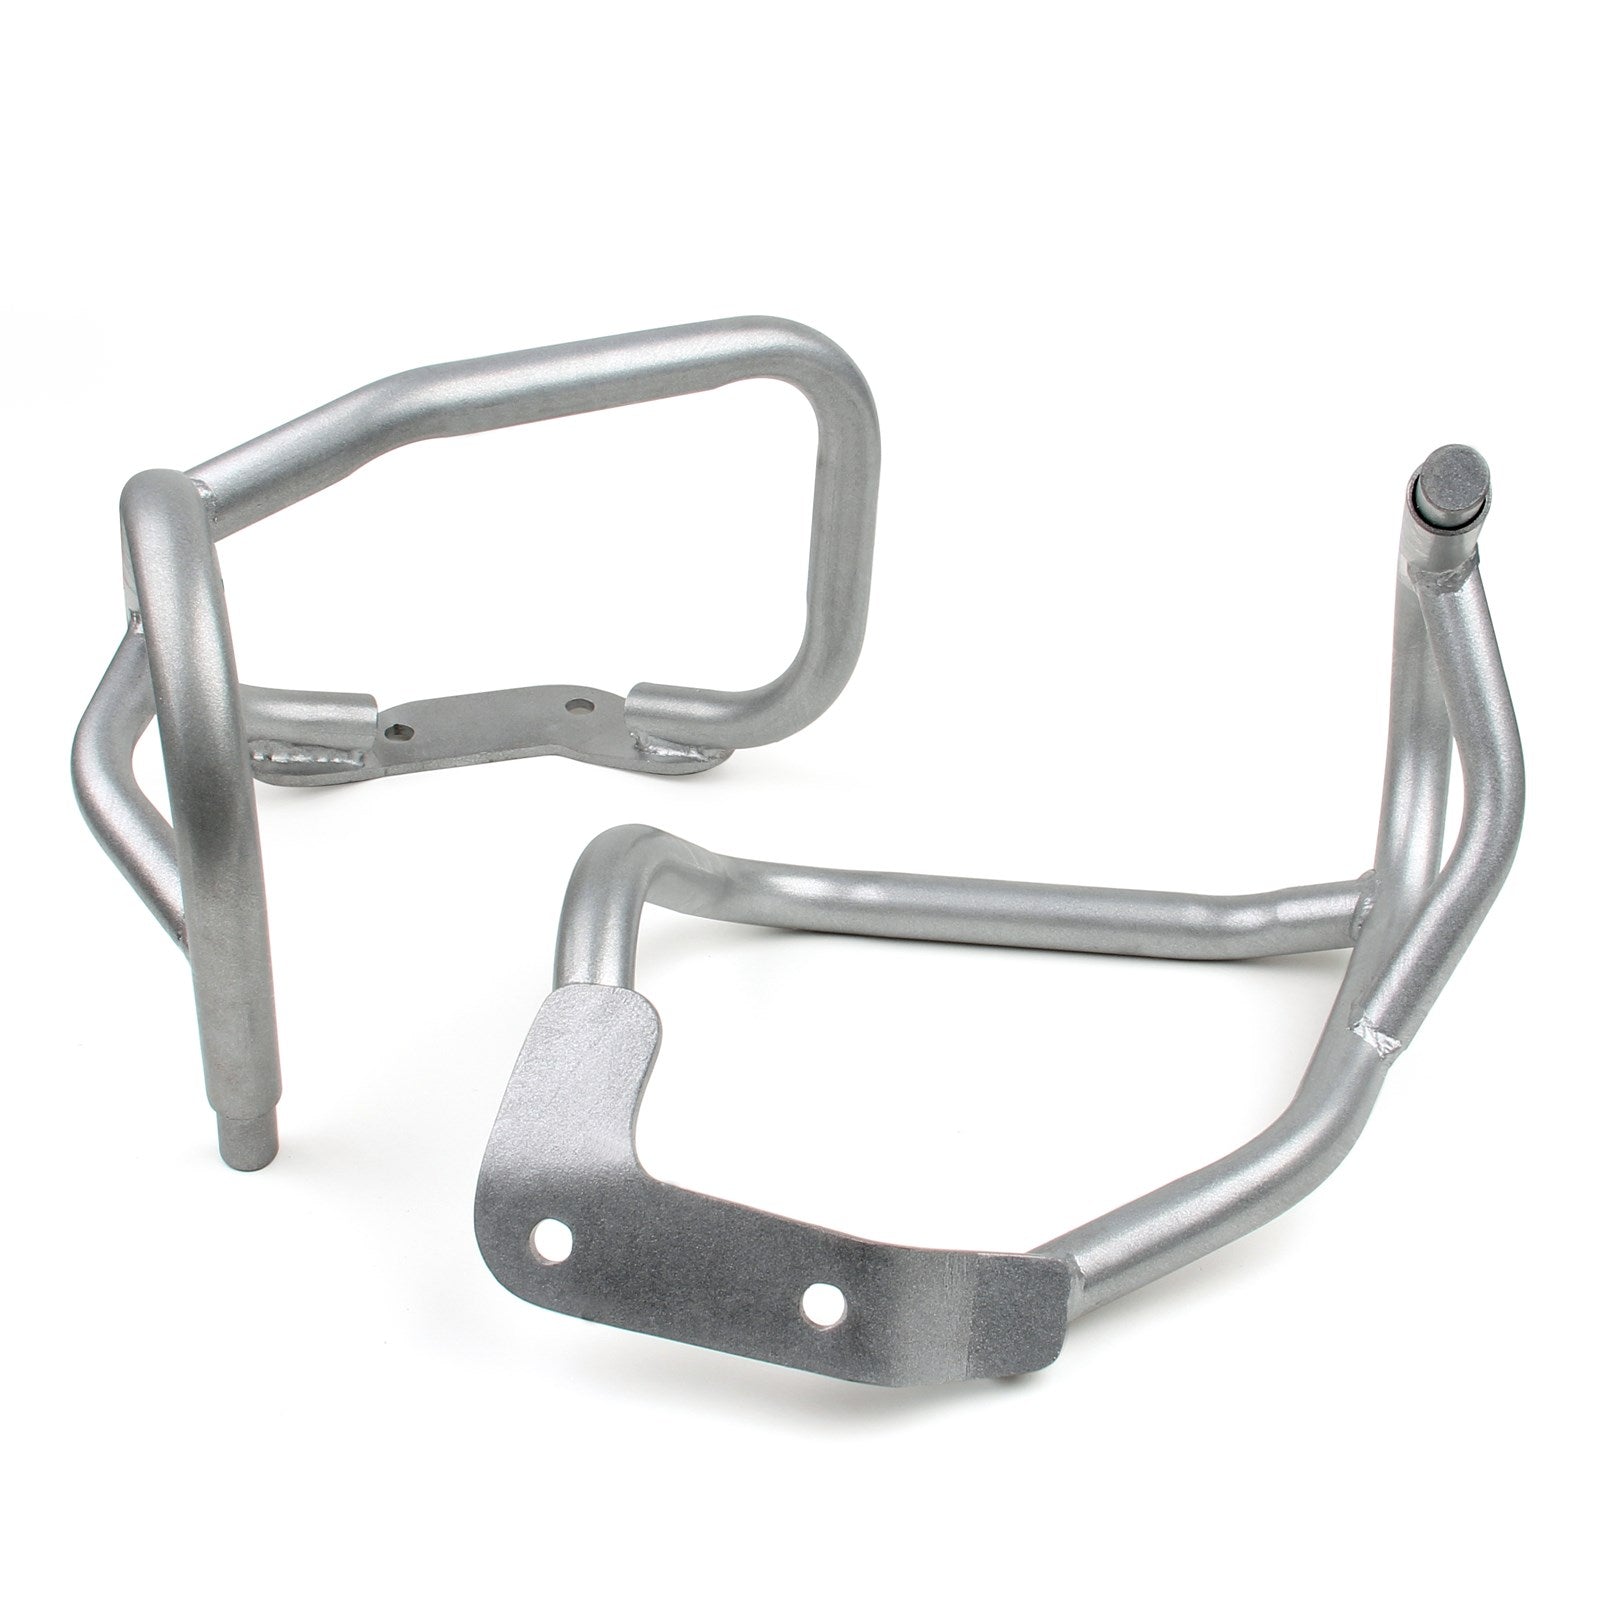 Lower Crash bars Protection For BMW R1200GS 2004-2012 Silver DHL Express Shipping